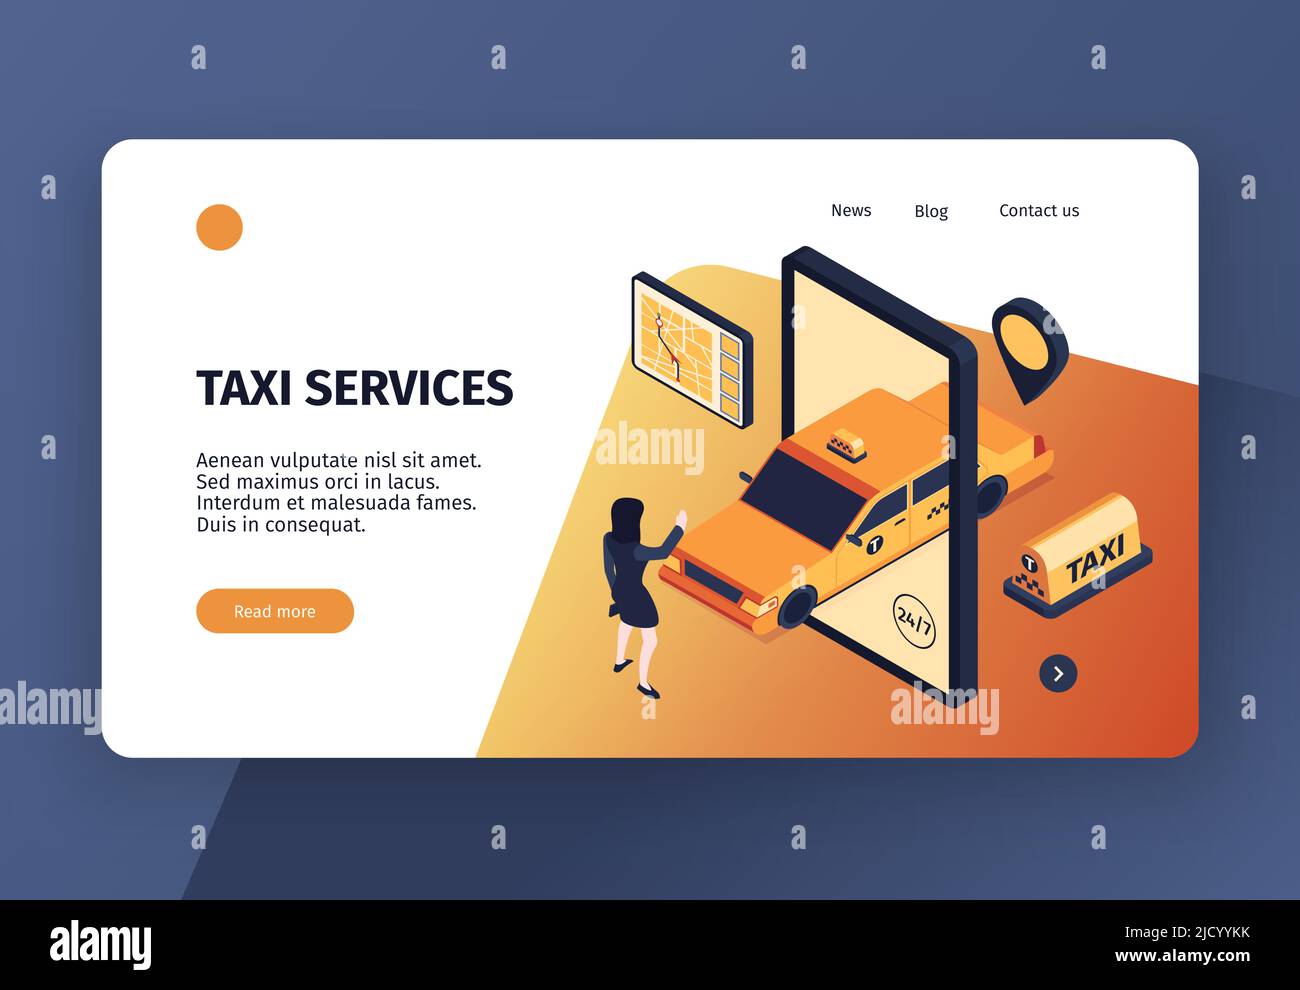 Isometric taxi concept banner web site landing page design with conceptual images clickable links and text vector illustration Stock Vector